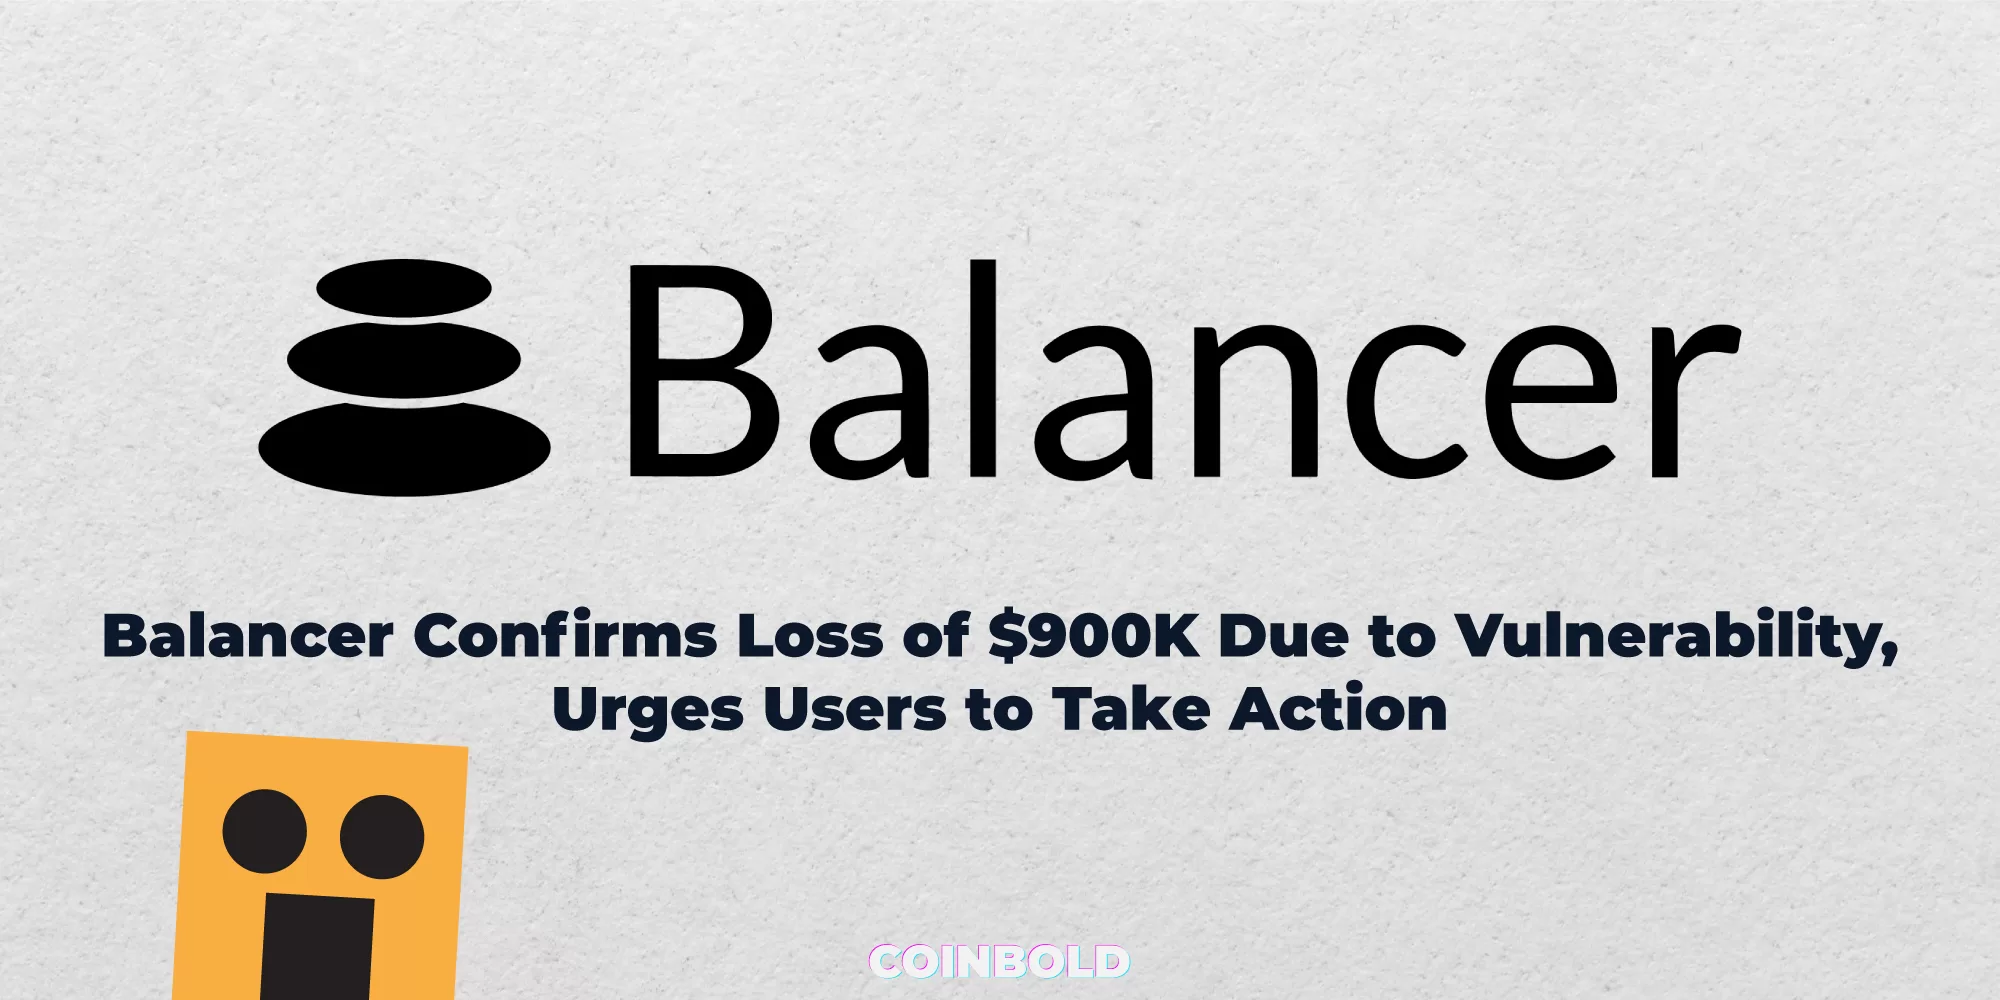 Balancer Confirms Loss of $900K Due to Vulnerability, Urges Users to Take Action